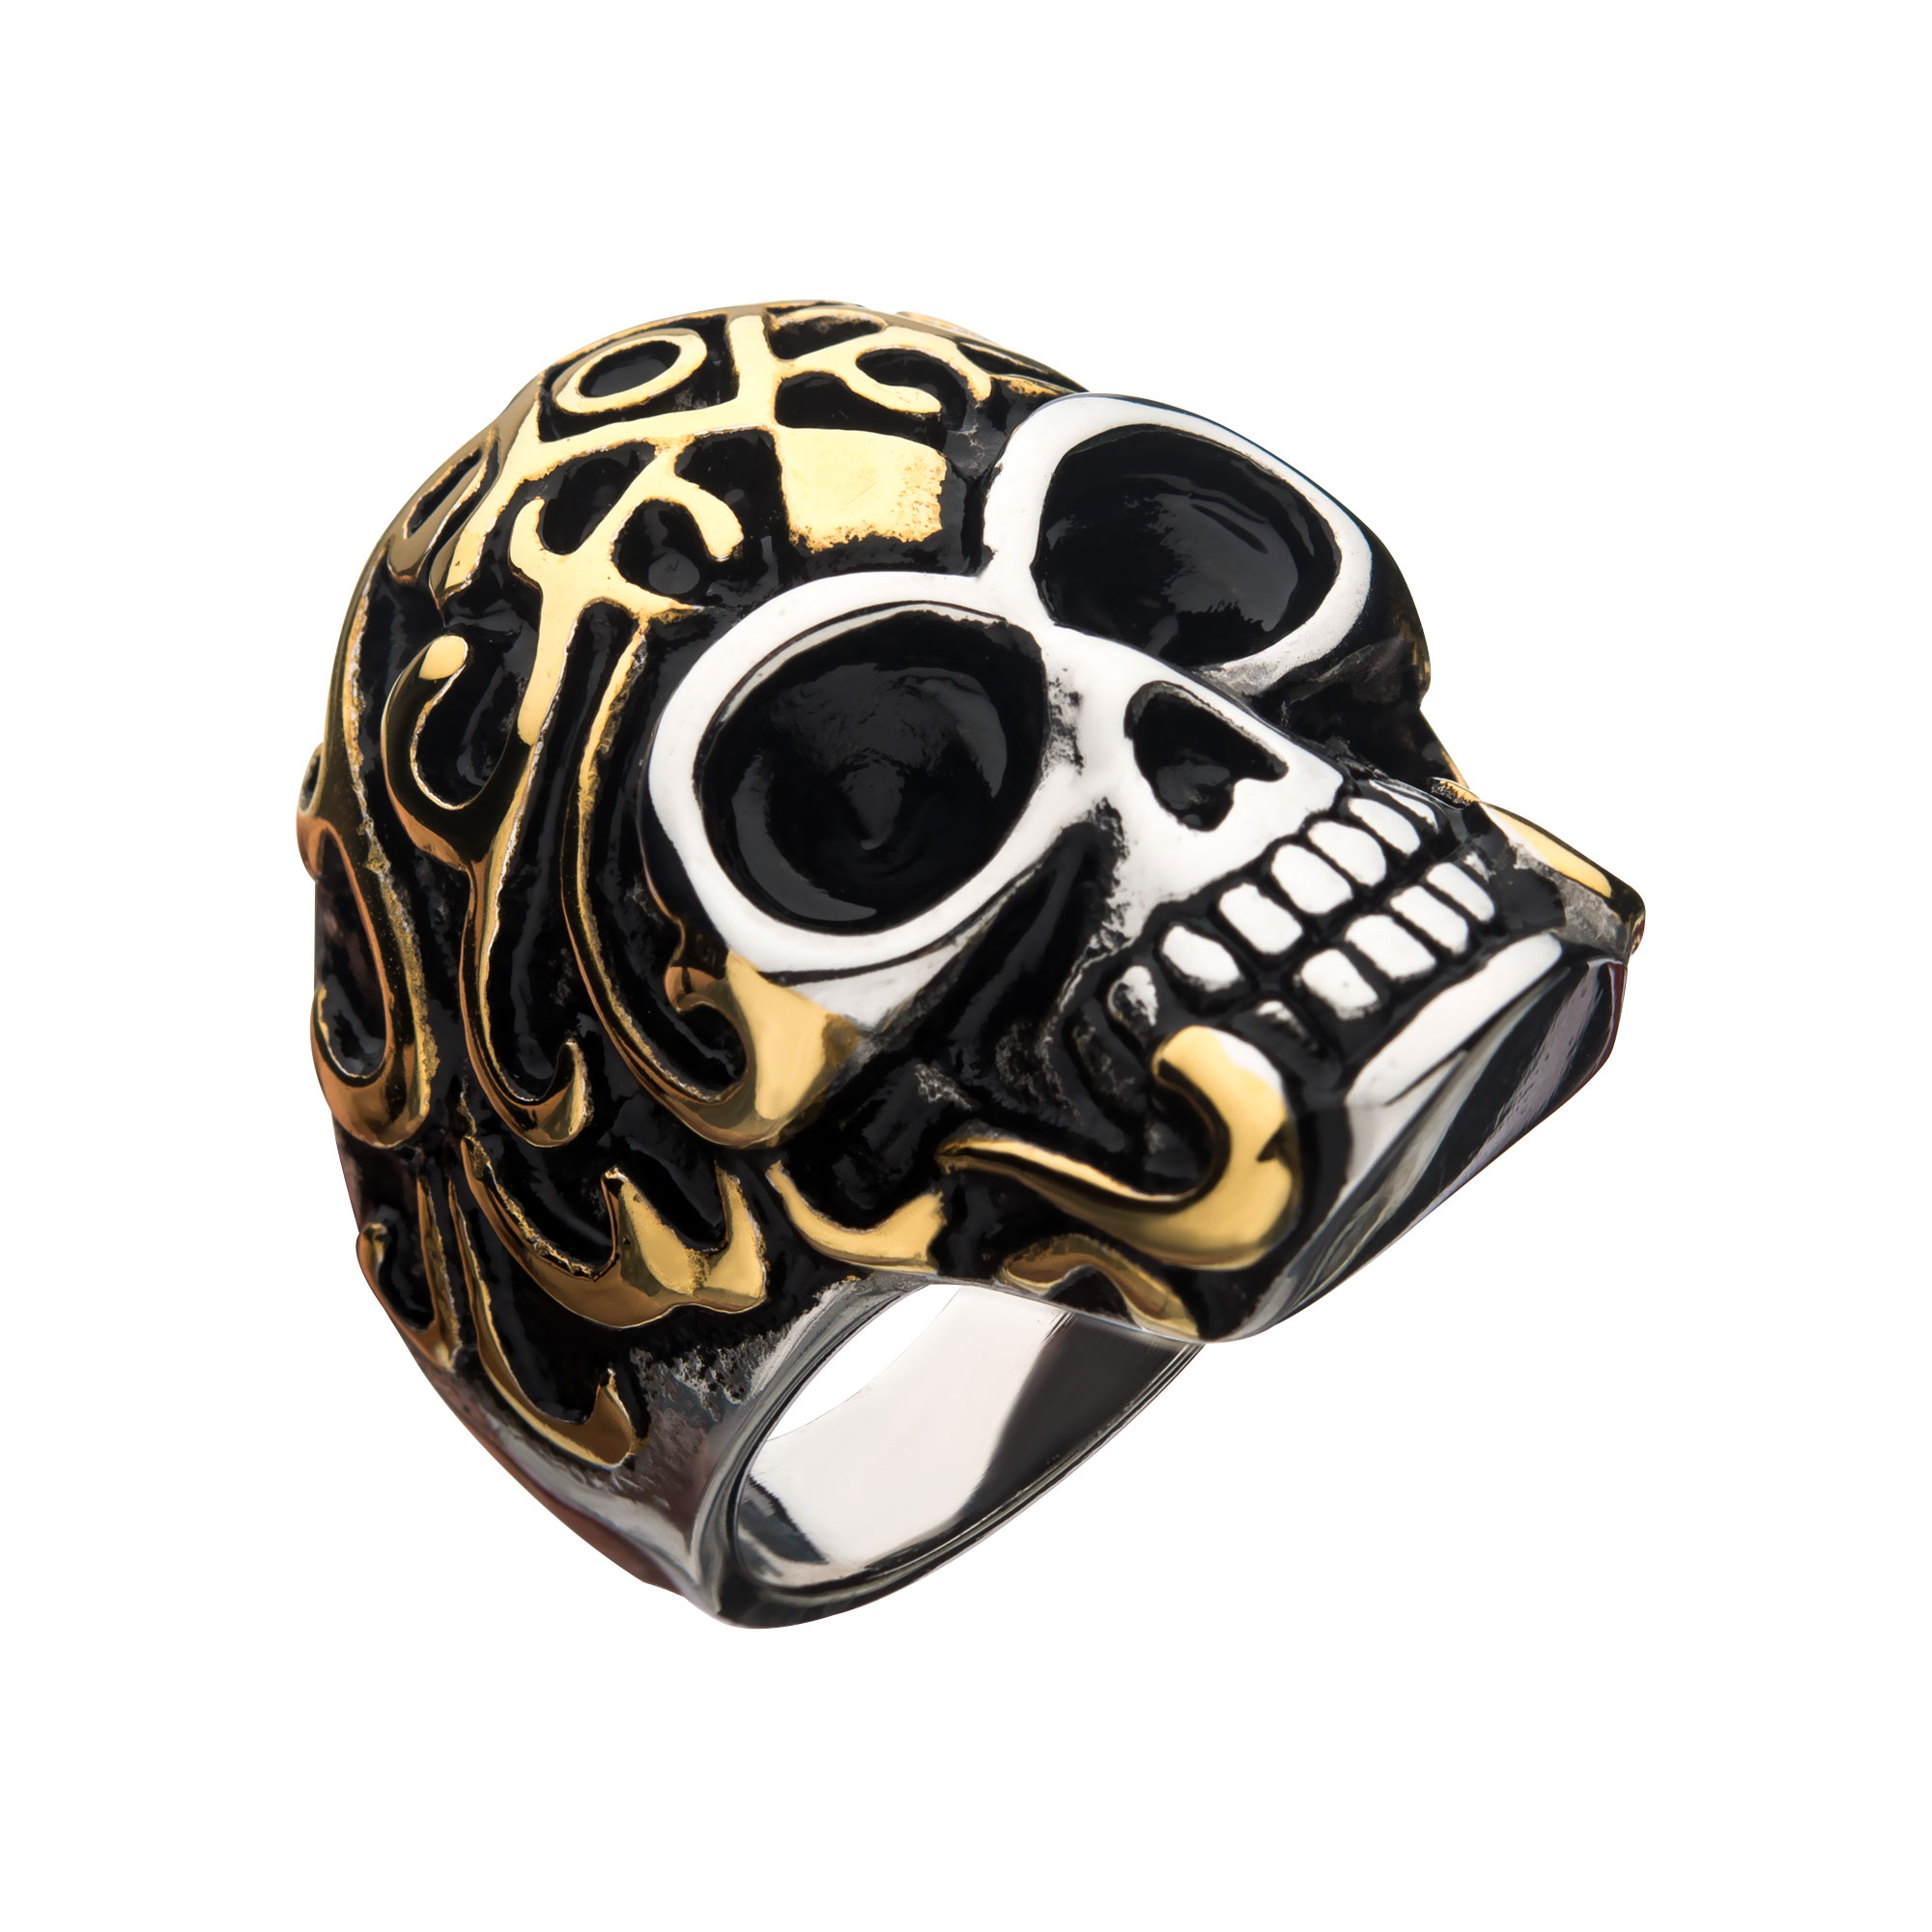 Oxidized Stainless Steel & Gold IP Skull Ring Thurber's Fine Jewelry Wadsworth, OH